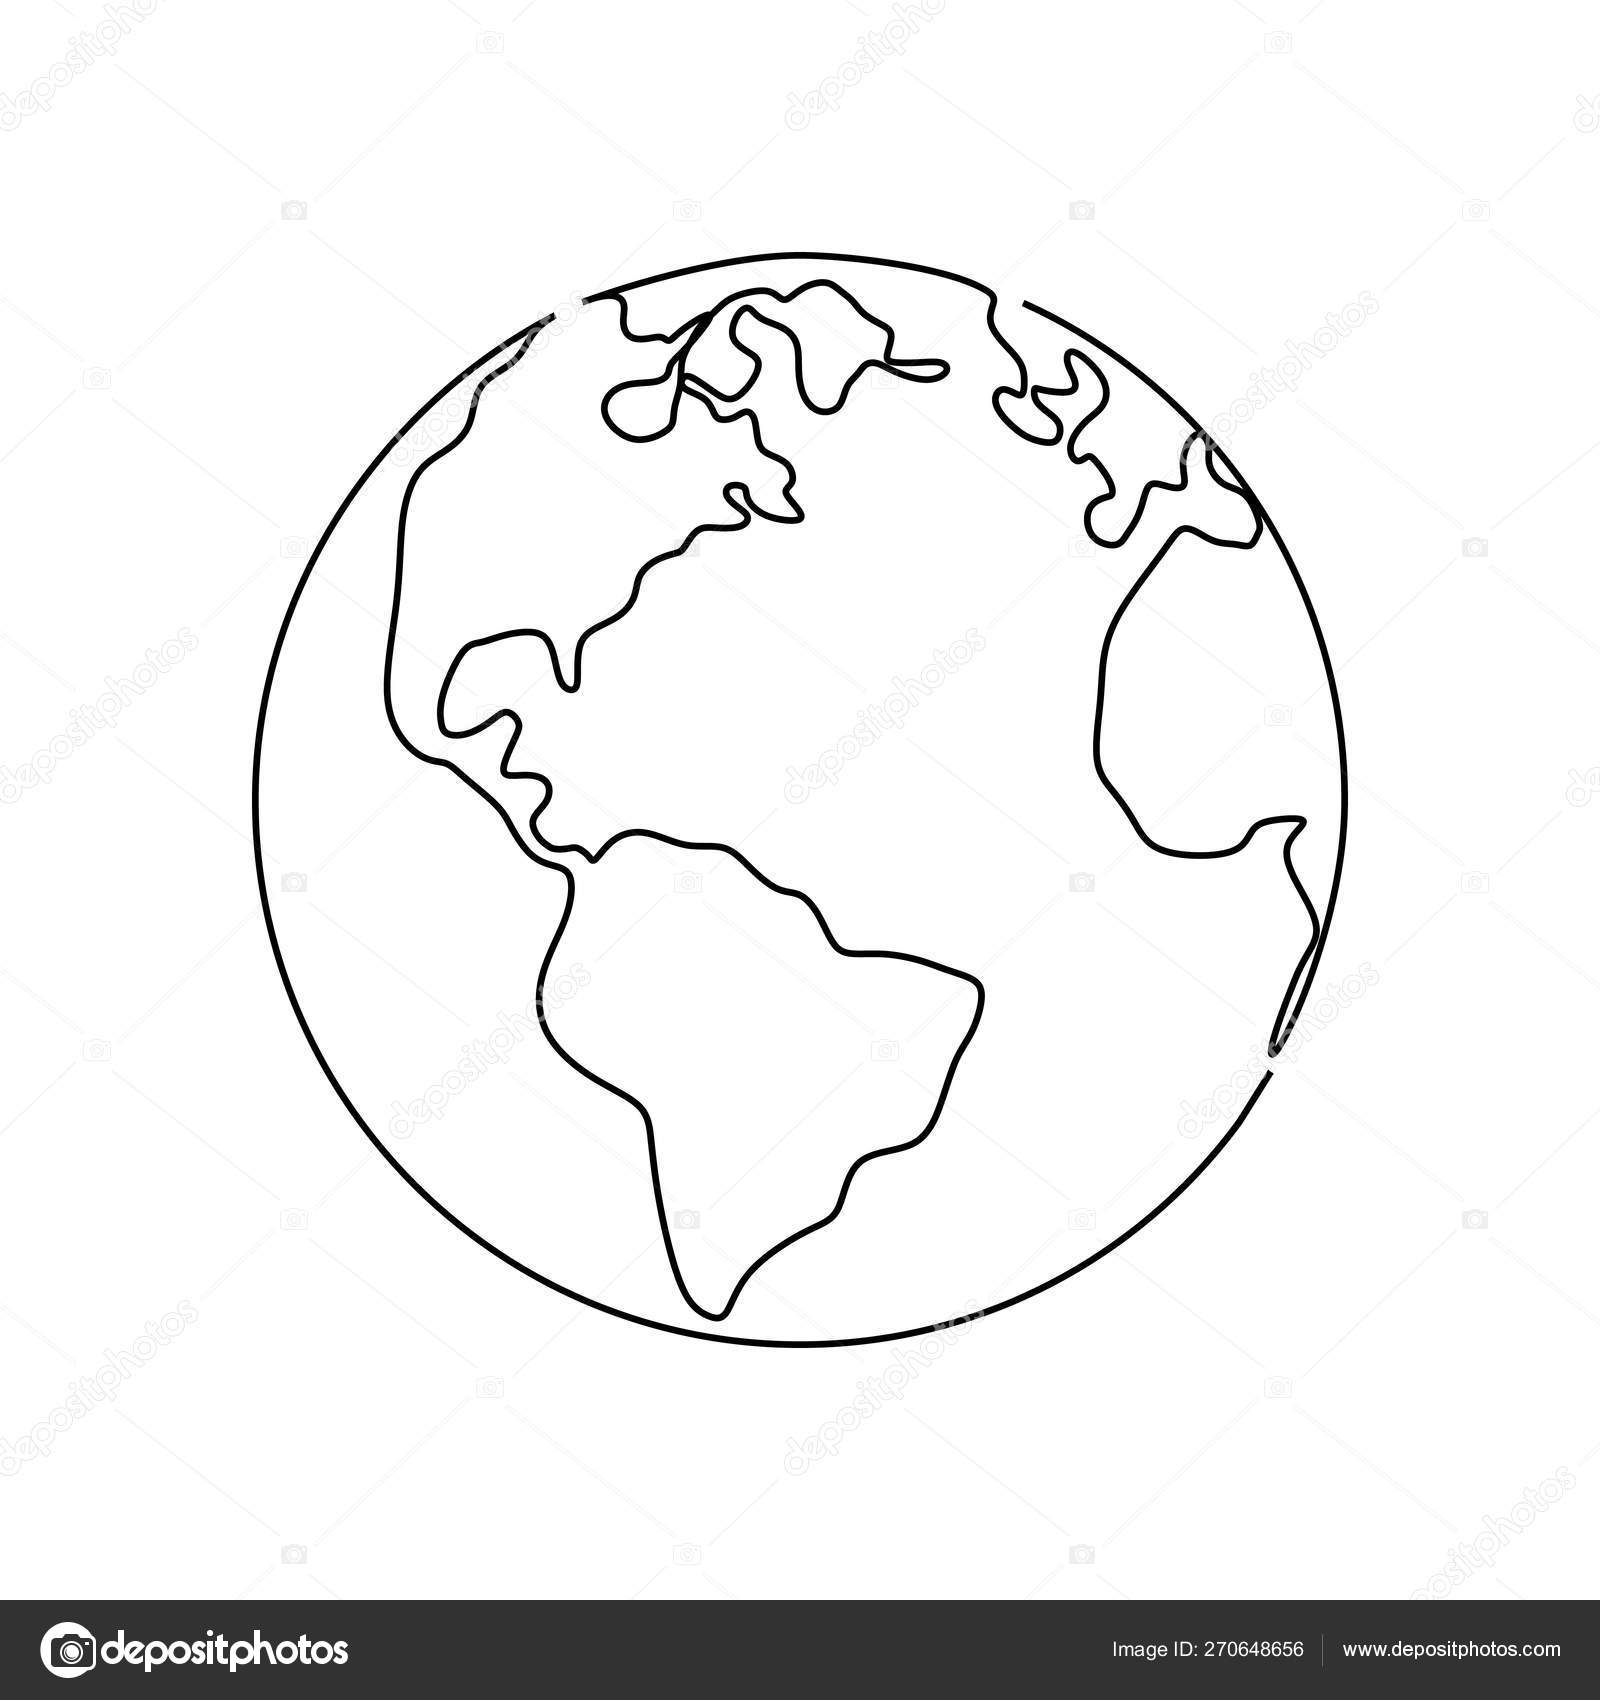 Earth Continuous One Line Drawing Vector Illustration On White Background Stock Vector C Ngupakarti